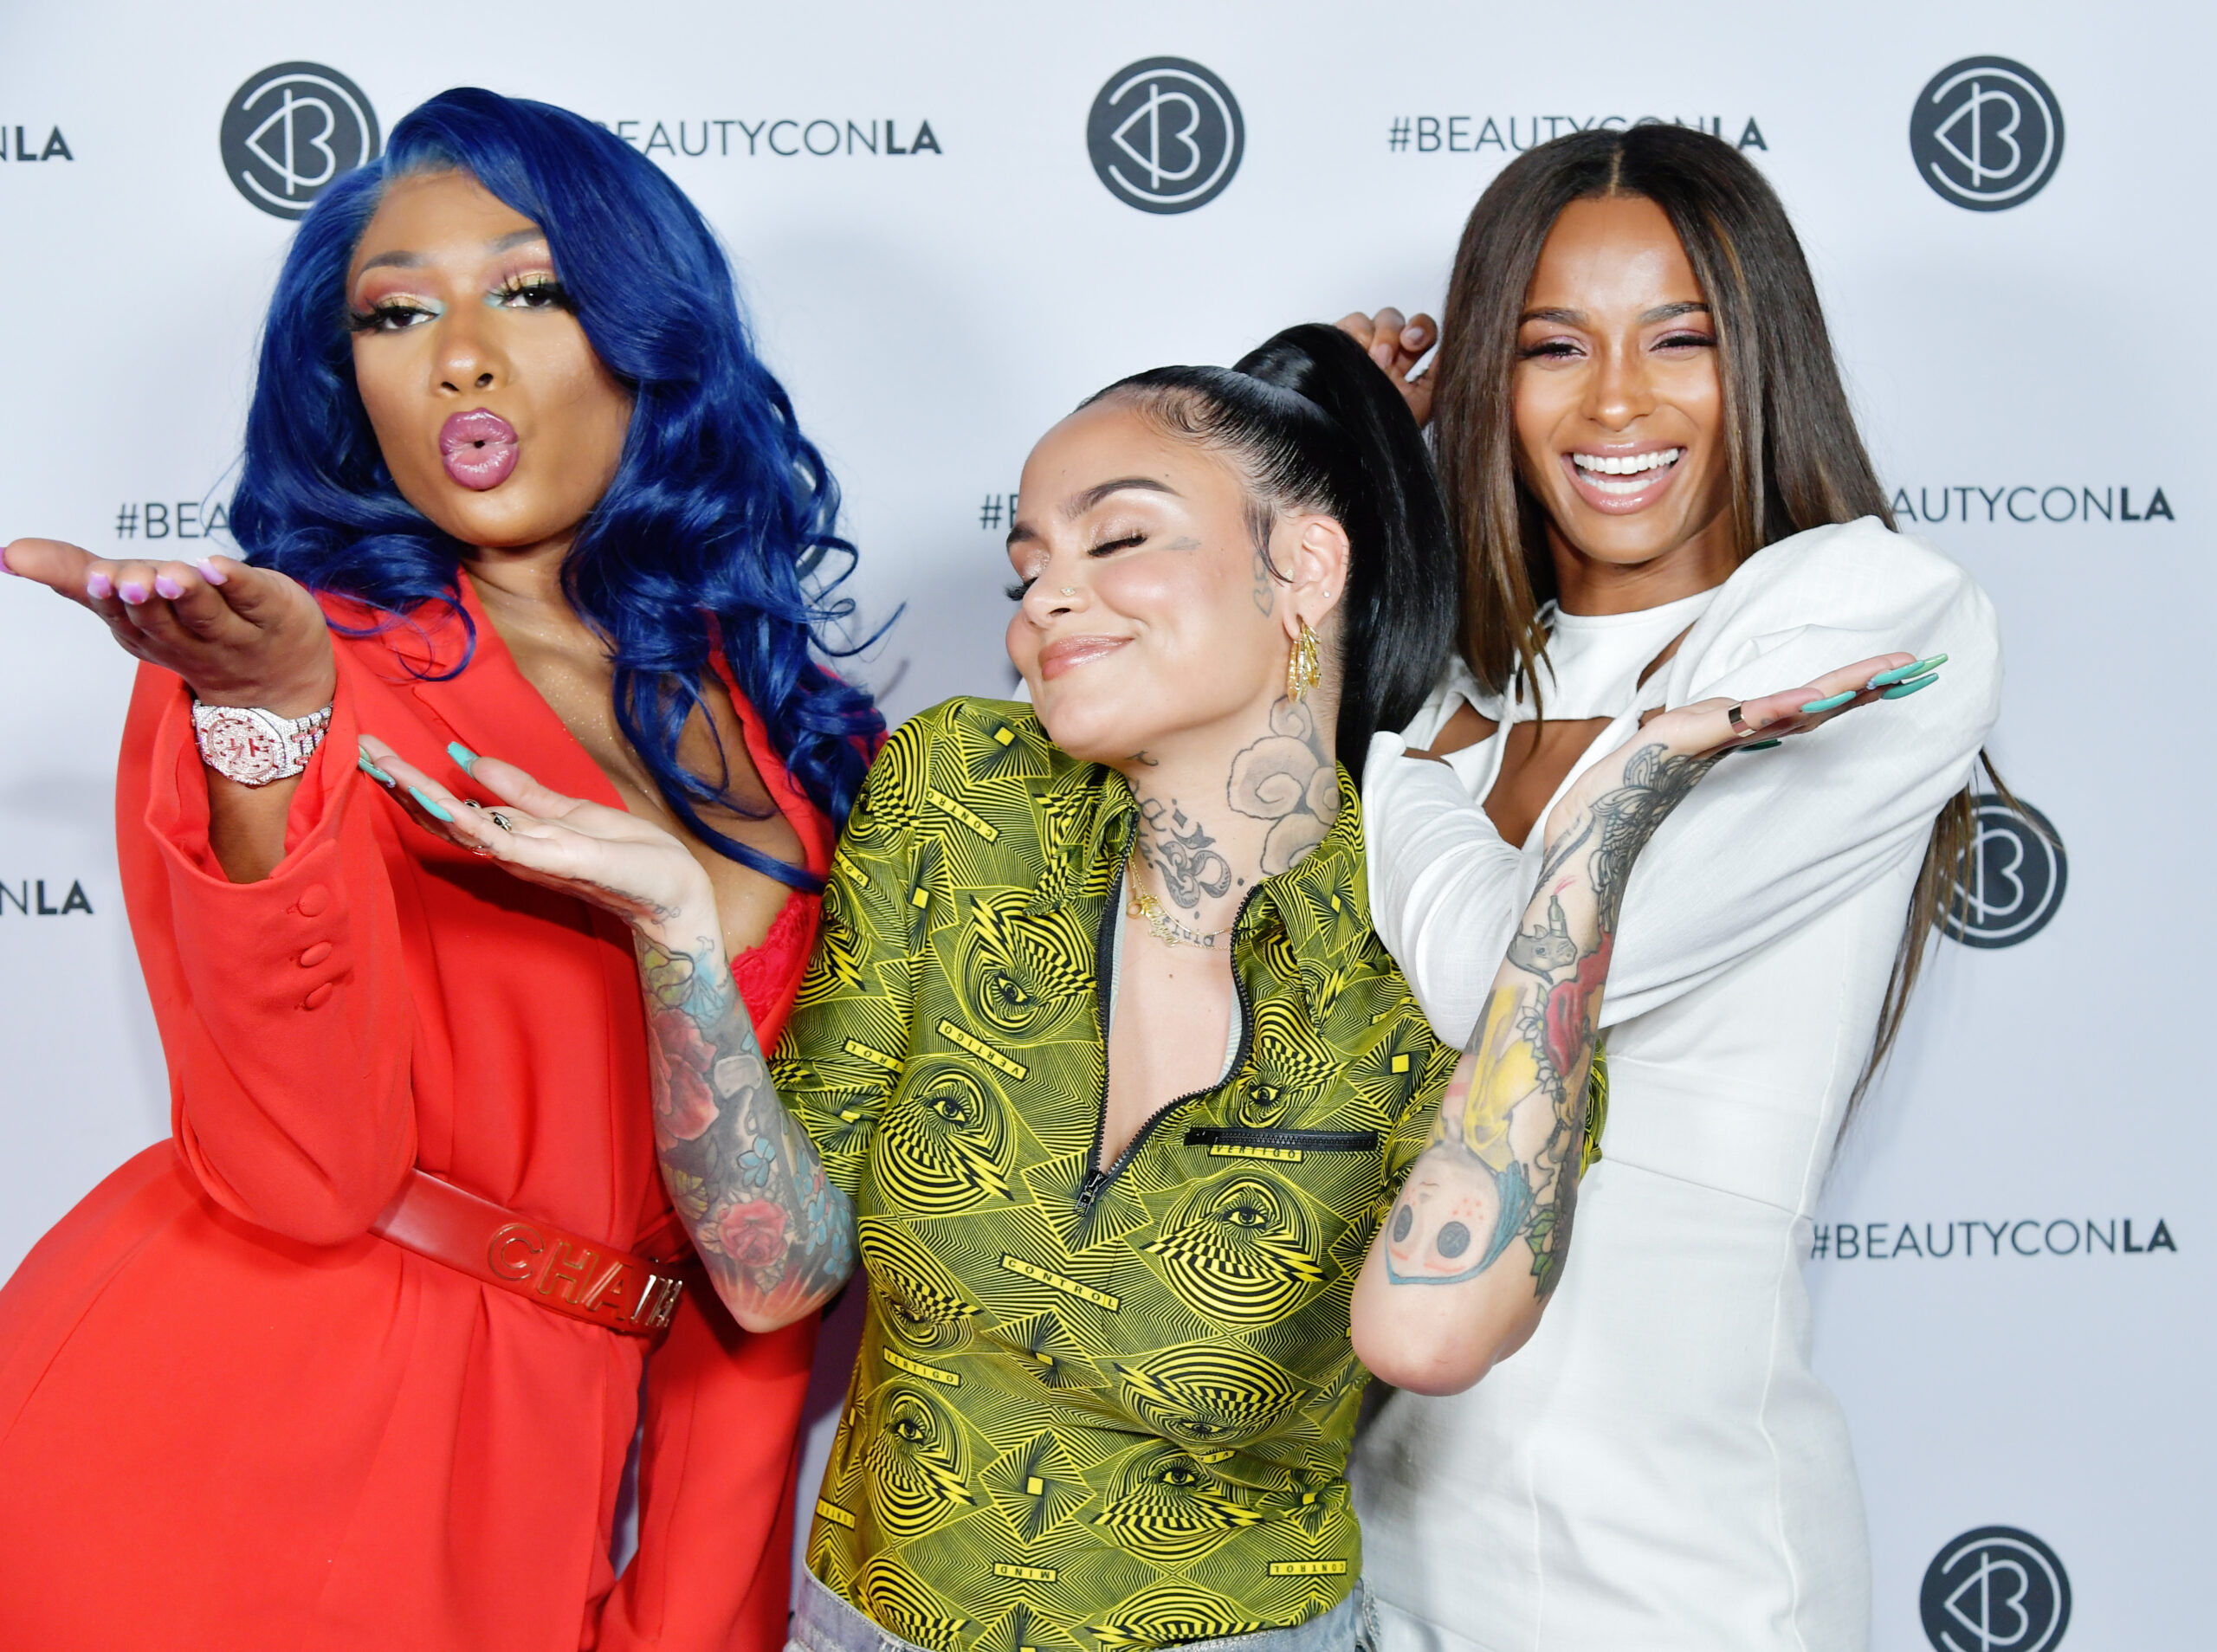 Beautycon Makes Its Official Return This September